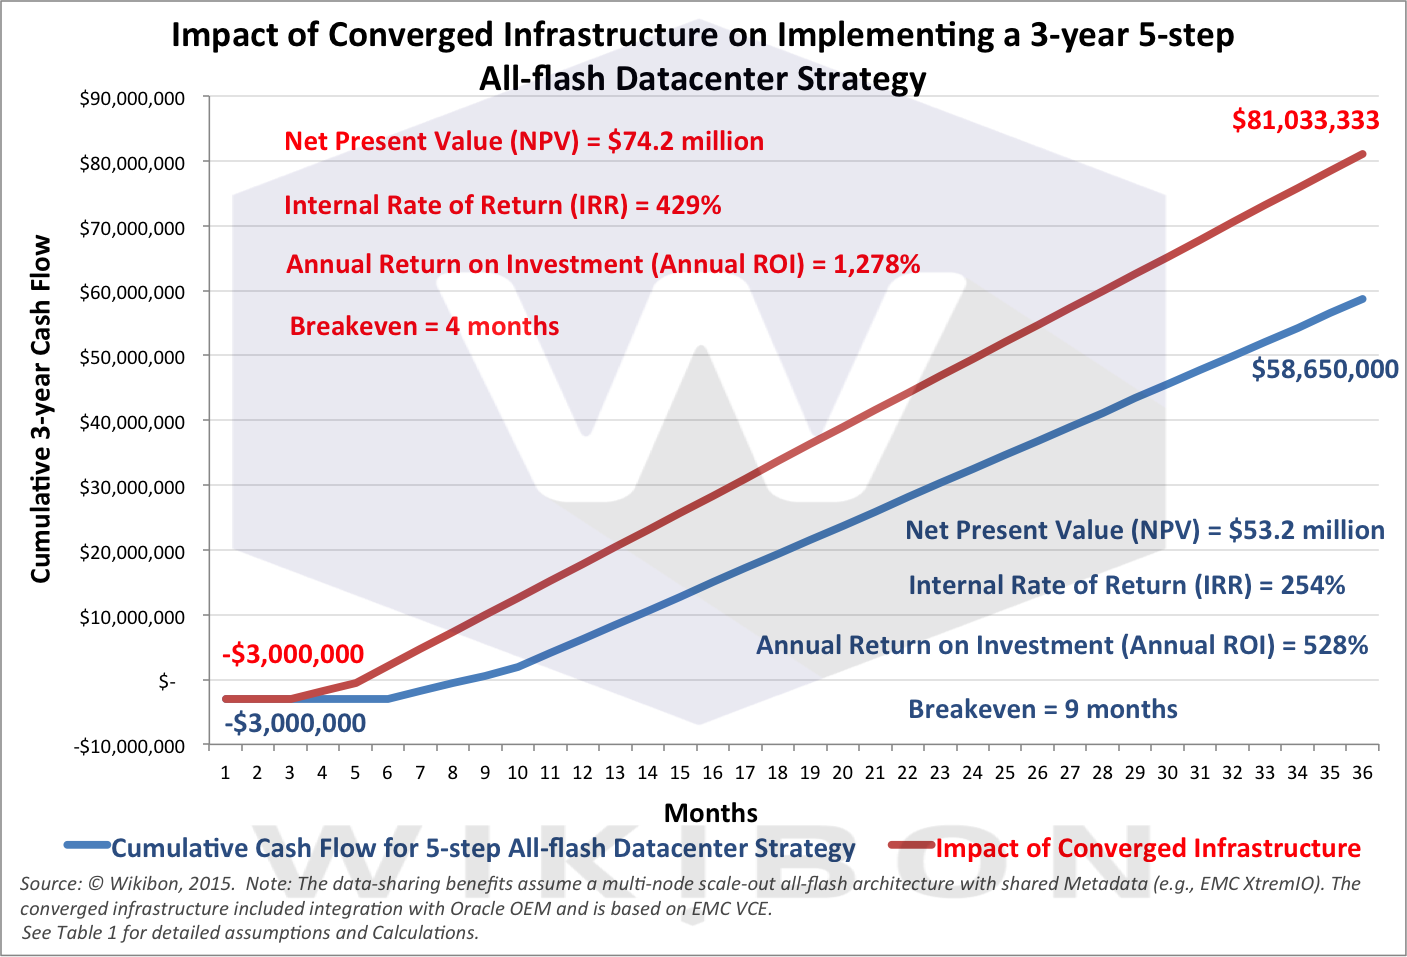 Figure 2: Impact of Converged Infrastructure on Cash Flow and Financial Metrics for a 5-step All-flash Strategy ProjectSource: © Wikibon 2015